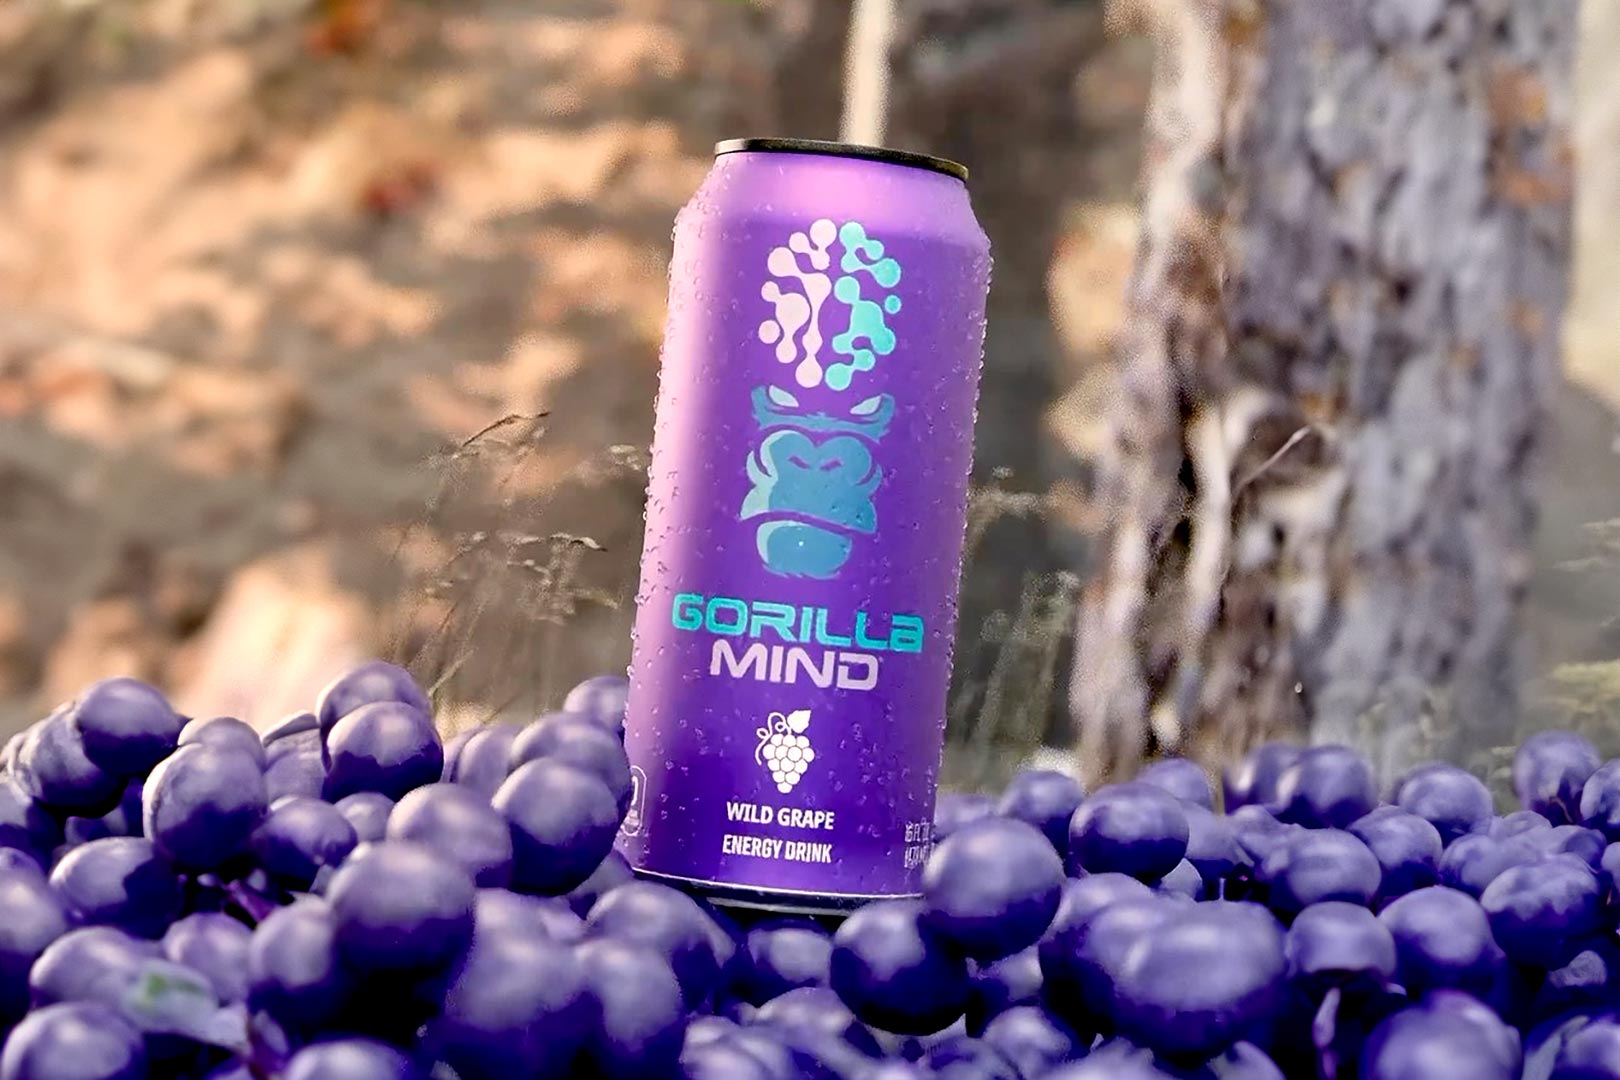 Gorilla Mind Energy makes a second variety pack for Wild Grape